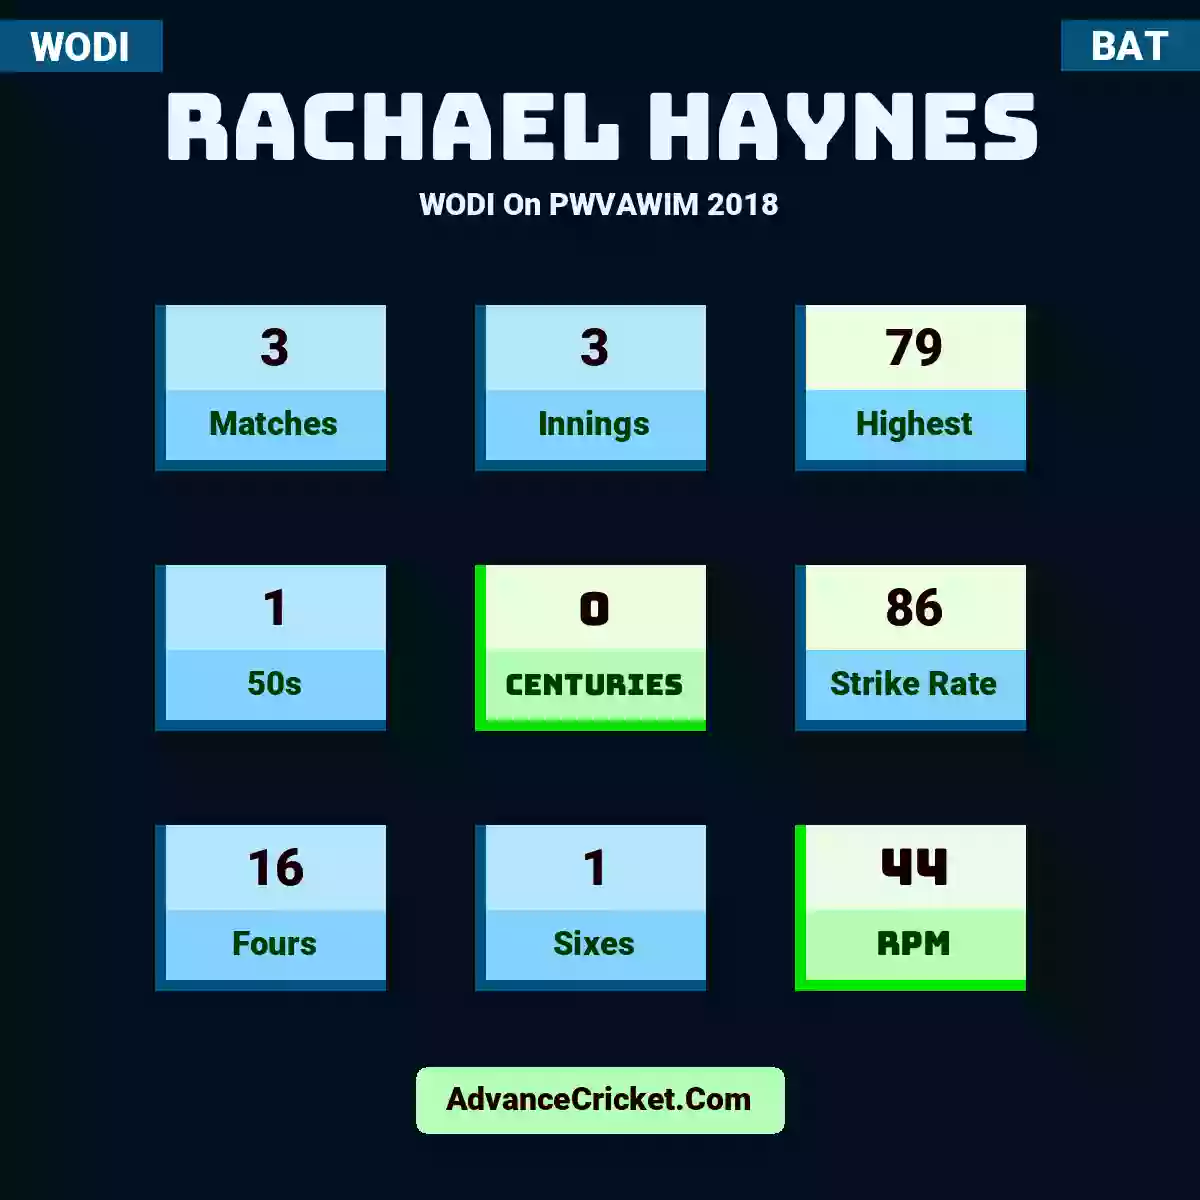 Rachael Haynes WODI  On PWVAWIM 2018, Rachael Haynes played 3 matches, scored 79 runs as highest, 1 half-centuries, and 0 centuries, with a strike rate of 86. R.Haynes hit 16 fours and 1 sixes, with an RPM of 44.